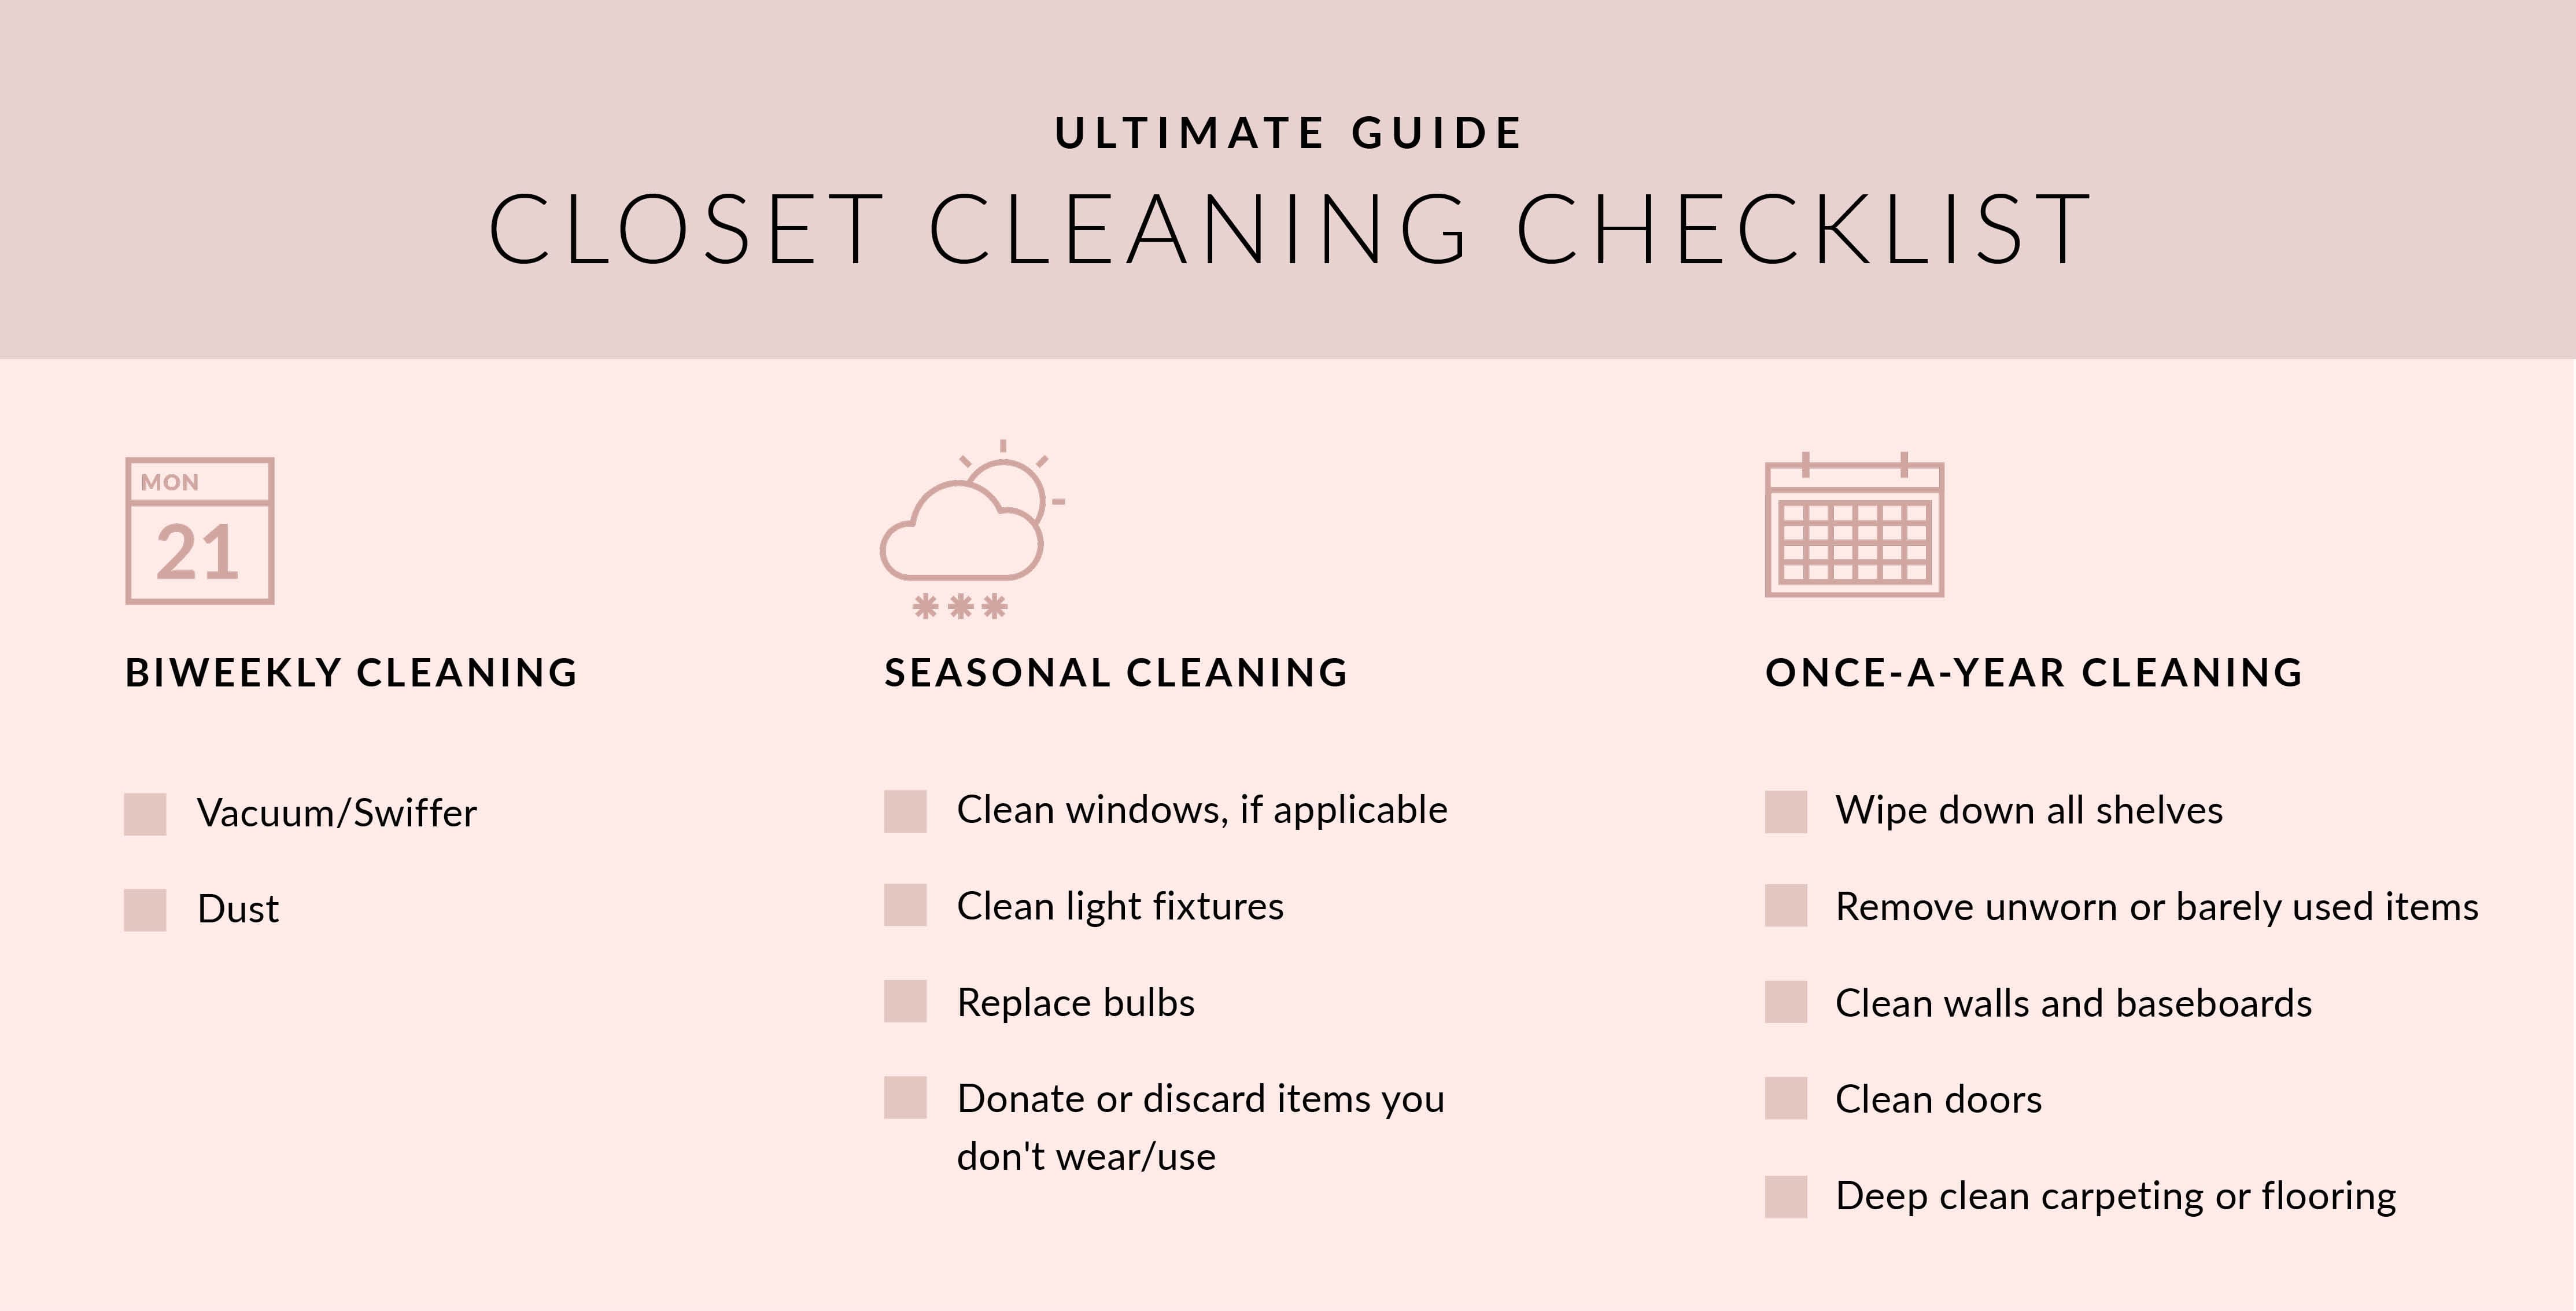 Closet Cleaning Checklist for Learning Center